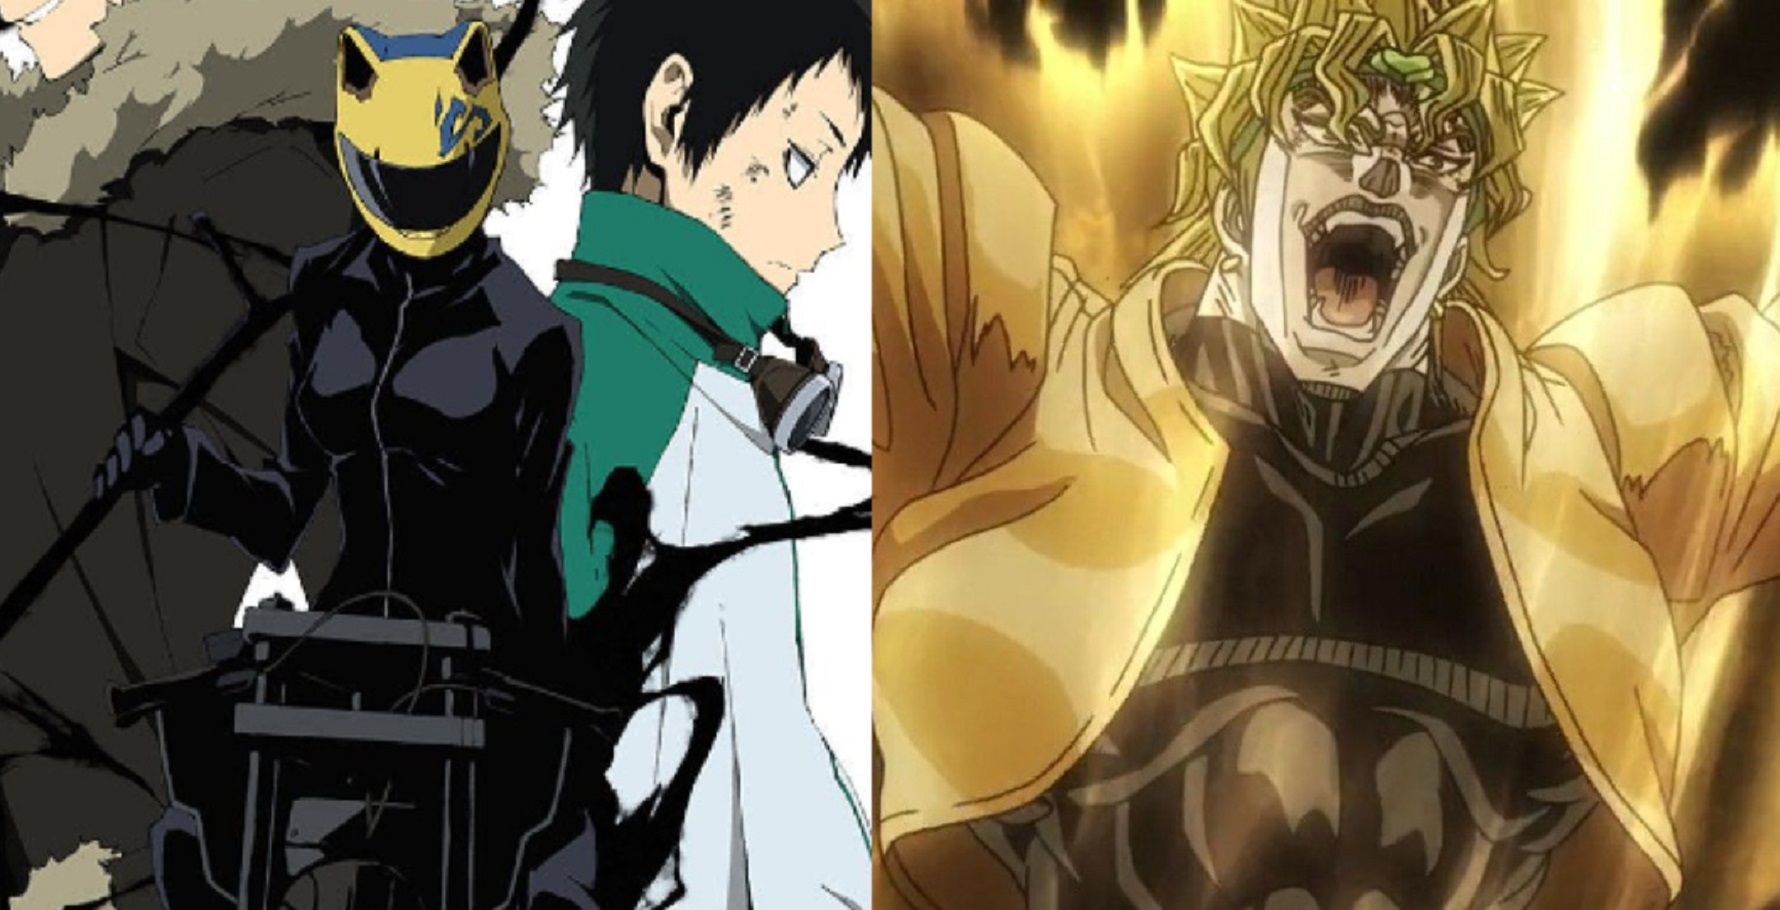 10 More Anime/Manga We Want To See Get A Hollywood Adaptation